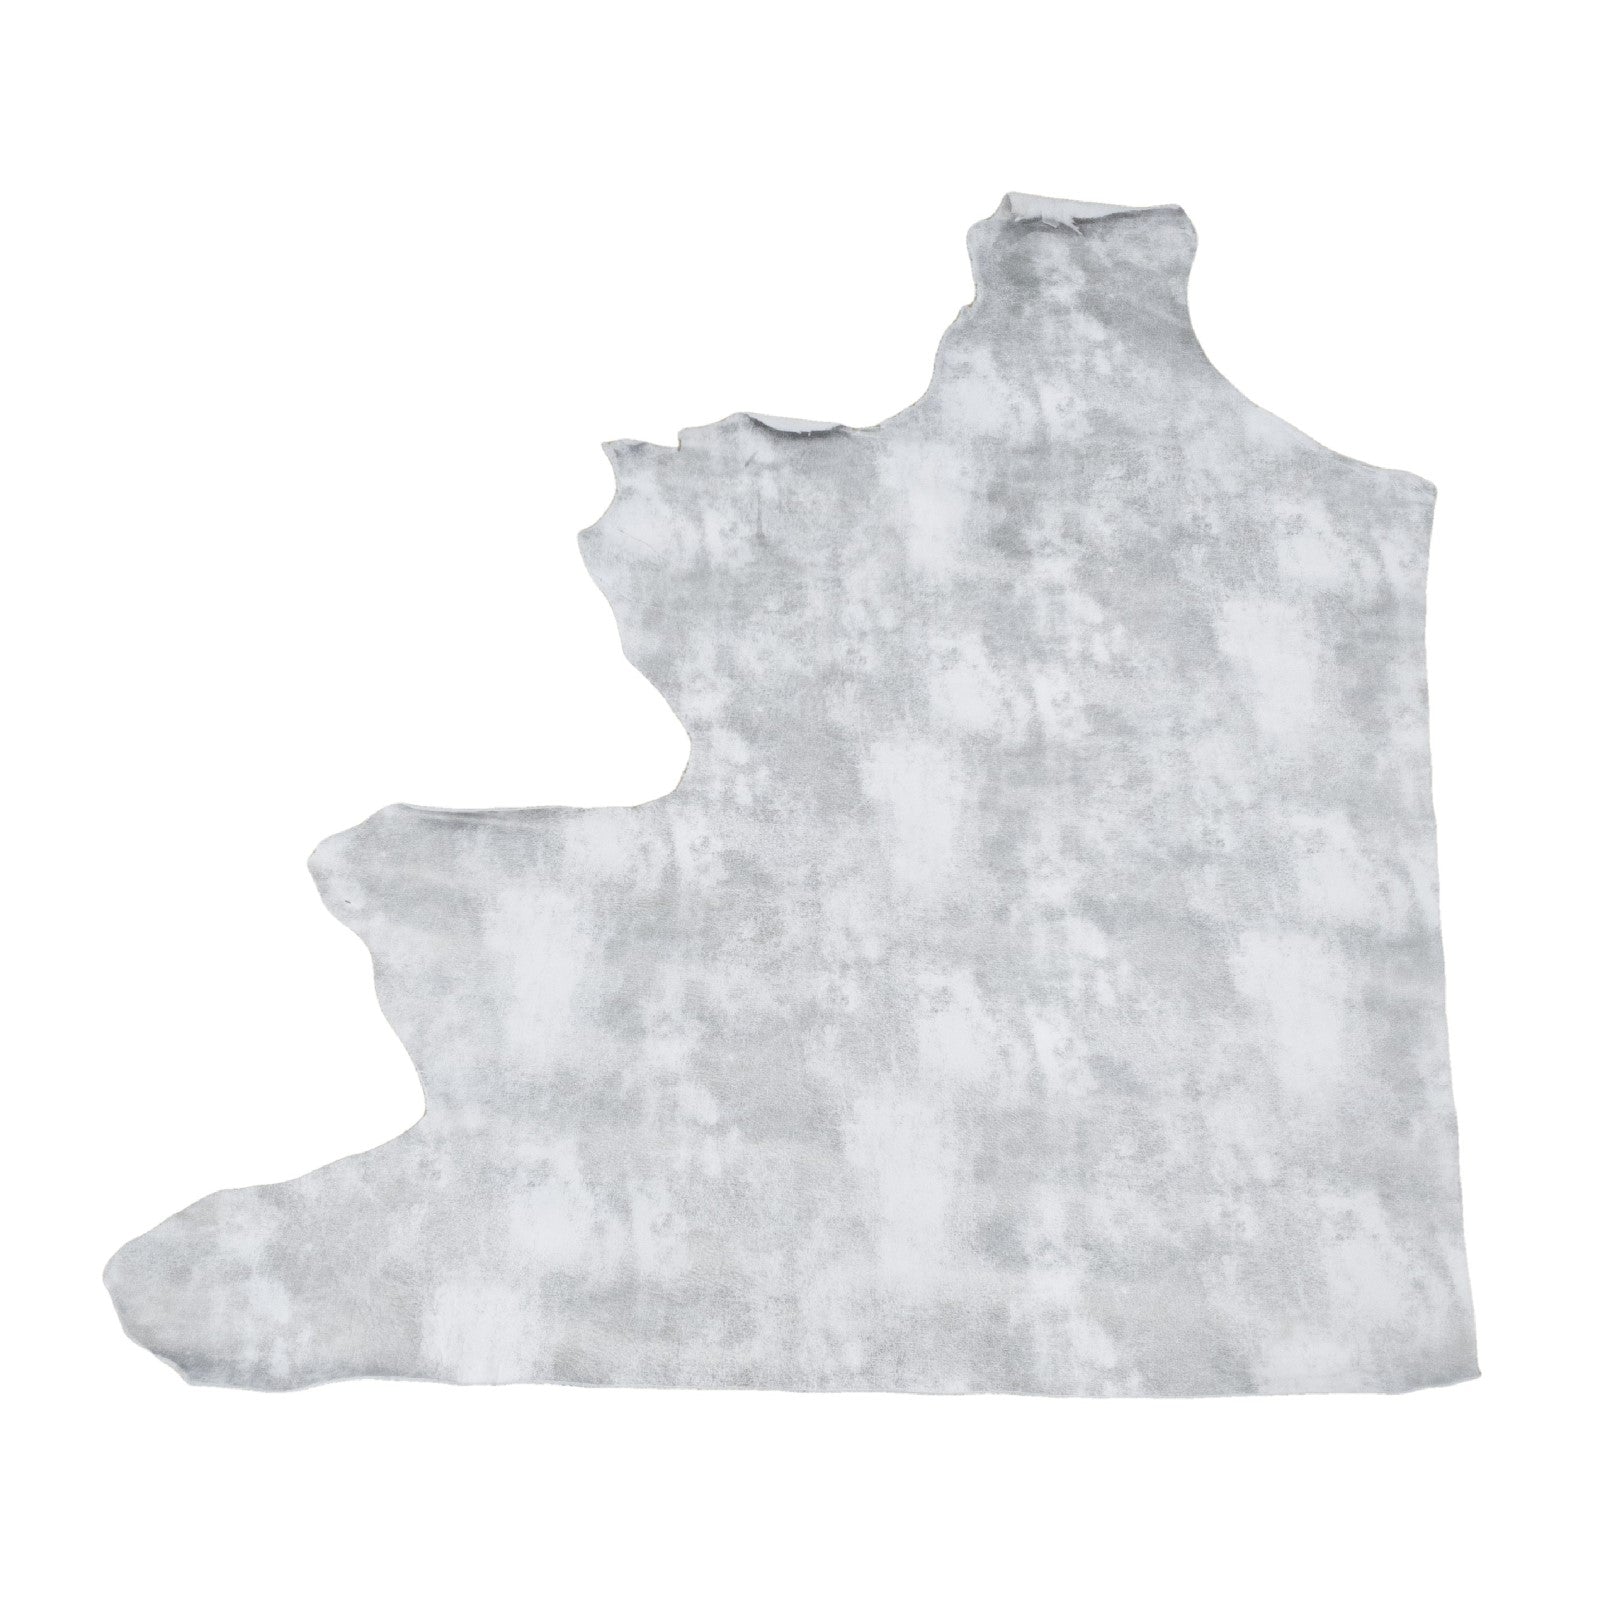 White Wedding, 2-3 oz Cow Hides, Rock N Roll, Top Piece / 6.5-7.5 | The Leather Guy